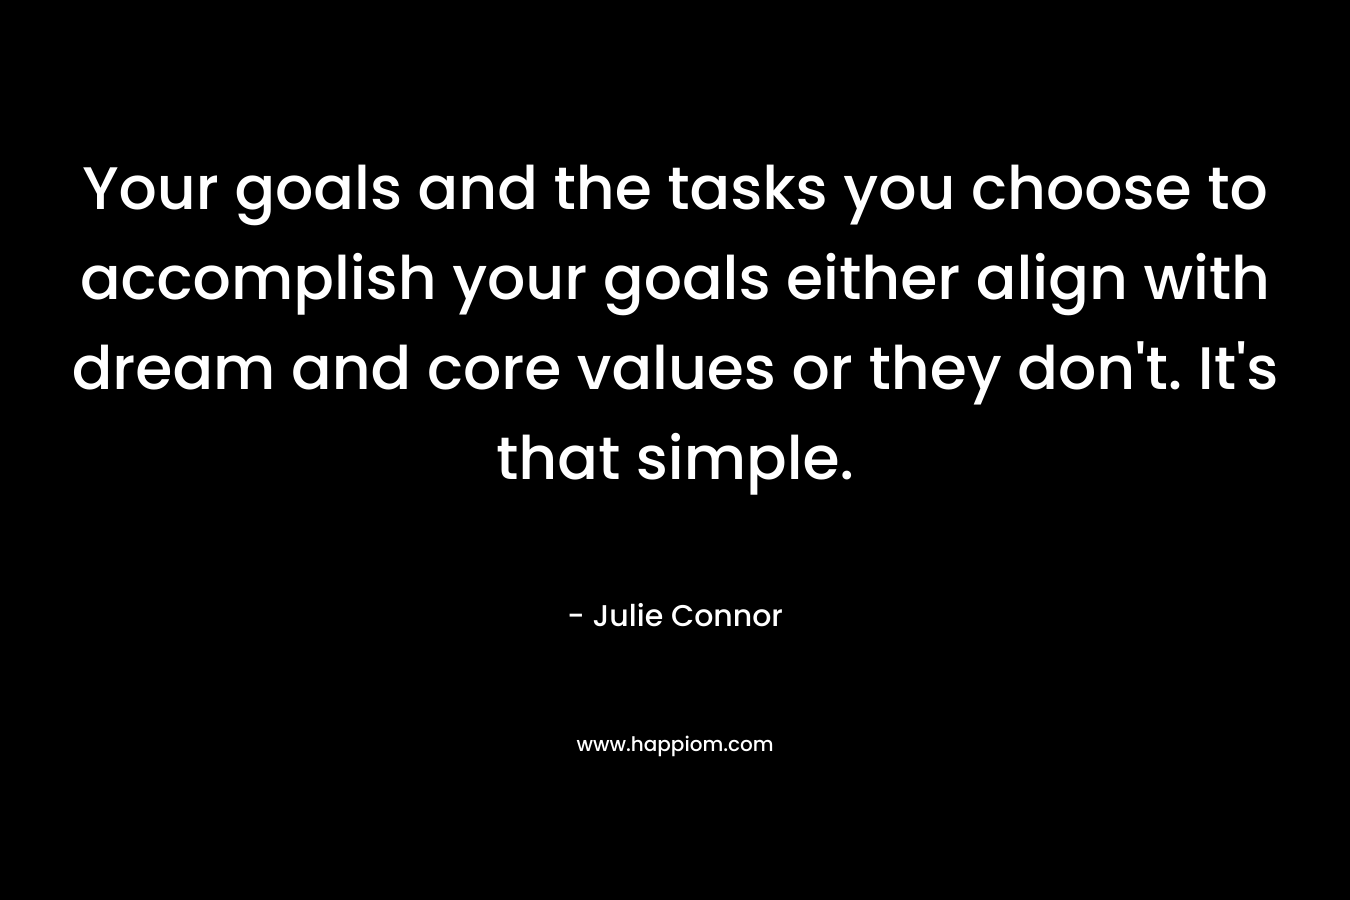 Your goals and the tasks you choose to accomplish your goals either align with dream and core values or they don’t. It’s that simple. – Julie Connor